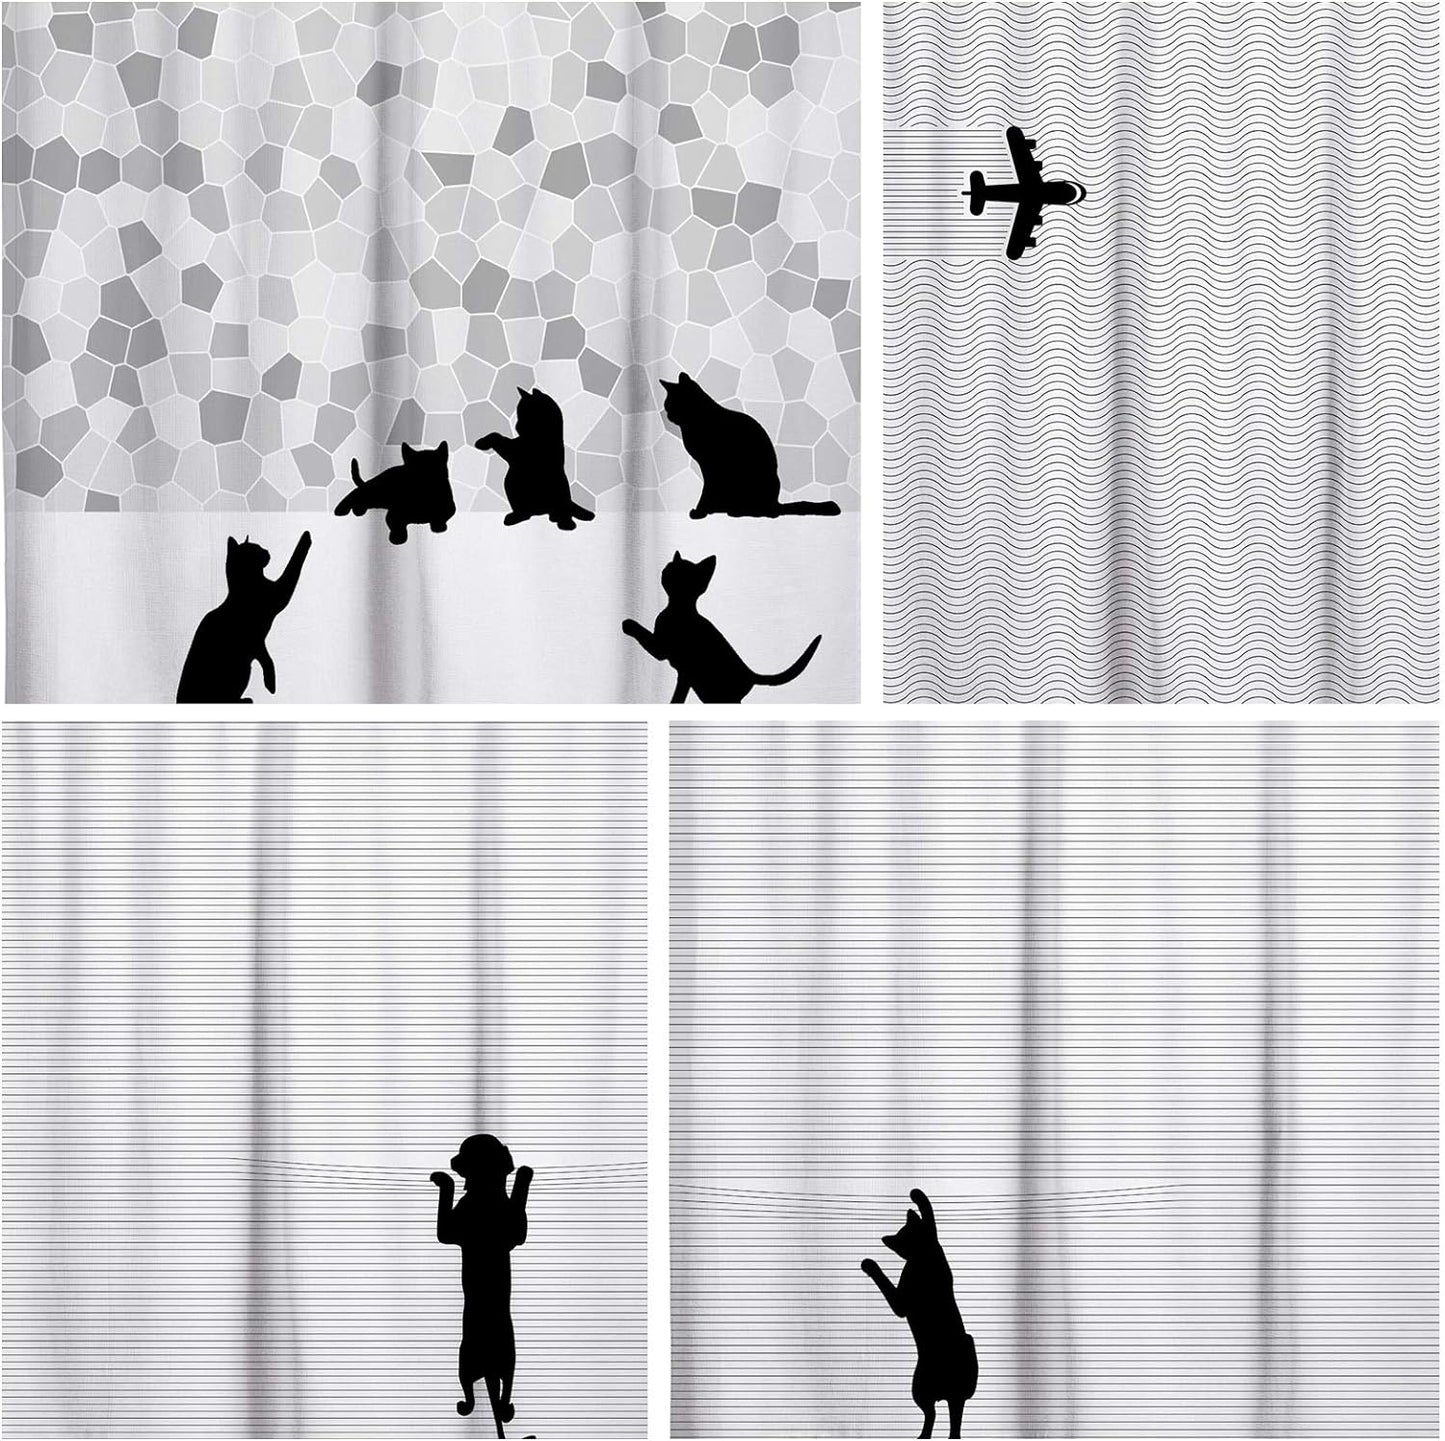 Sunlit Design Black Cat Silhouette and Gray Mosaic Fabric Shower Curtain. Grey and White